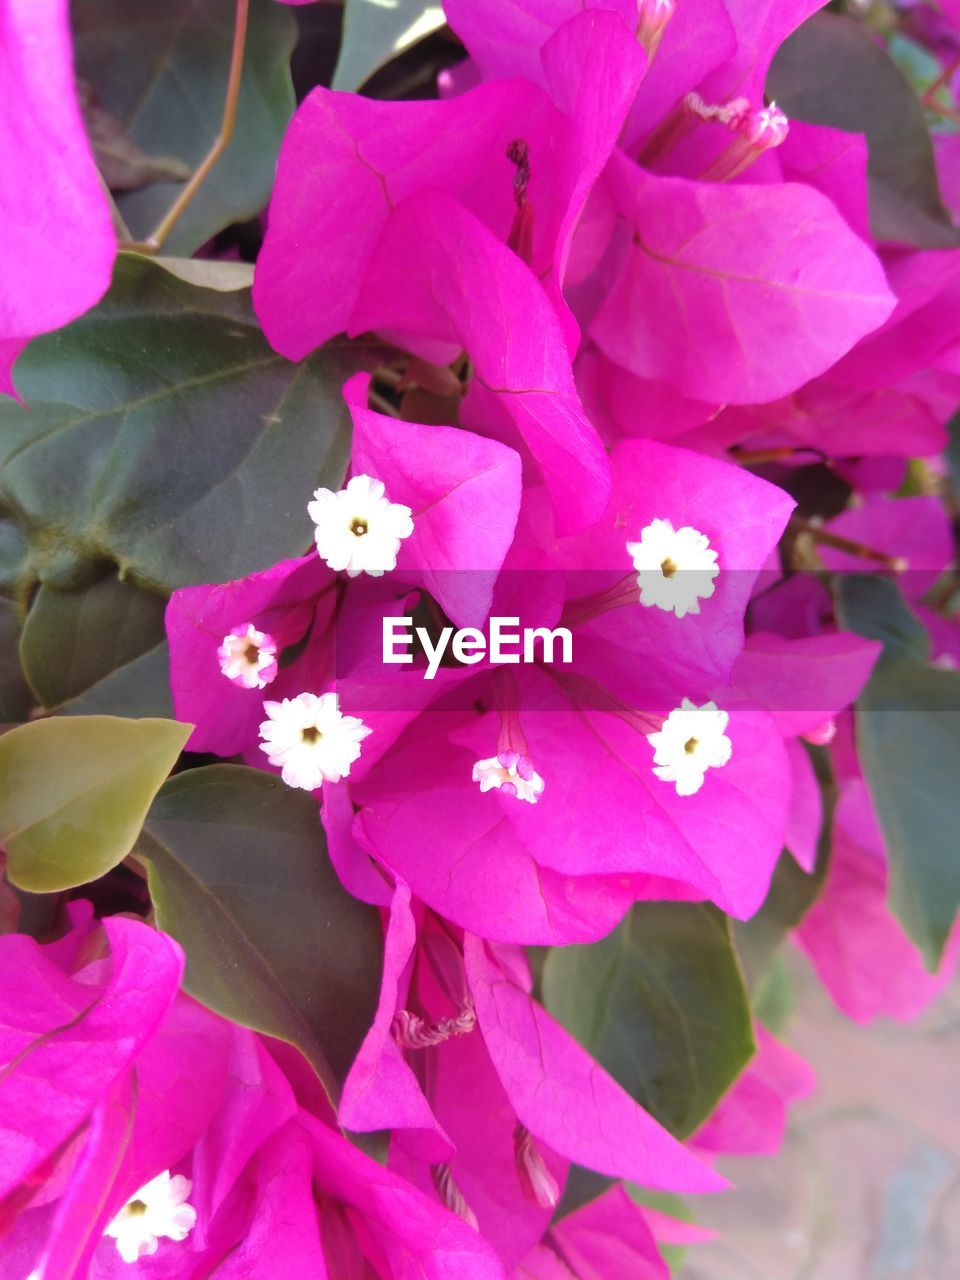 flower, flowering plant, plant, pink, beauty in nature, freshness, petal, fragility, close-up, flower head, growth, inflorescence, nature, no people, leaf, plant part, springtime, outdoors, blossom, day, magenta, pollen, botany, focus on foreground, bougainvillea